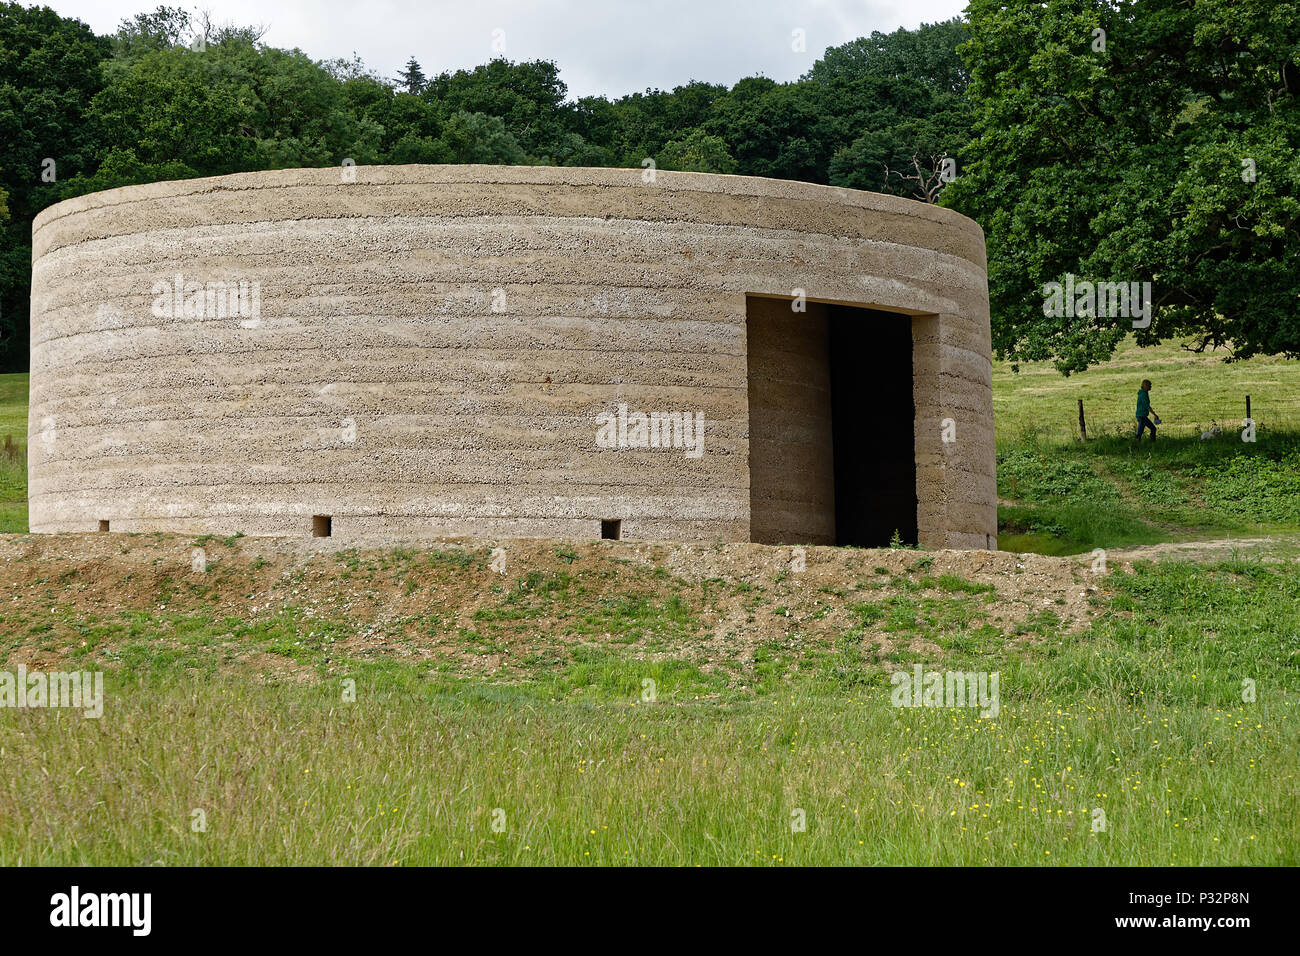 Sunday 17th June 2018. Runnymede Meadows, Surrey, England.'Writ In Water' designed by artist Mark Wallinger to 'reflect upon the founding principles of democracy'. Created in collaboration with Studio Octopi it opened to the public yesterday on16th June & sits on public 'land held in common' at Runnymede by the National Trust. Credit: wyrdlight/Alamy Live News Stock Photo